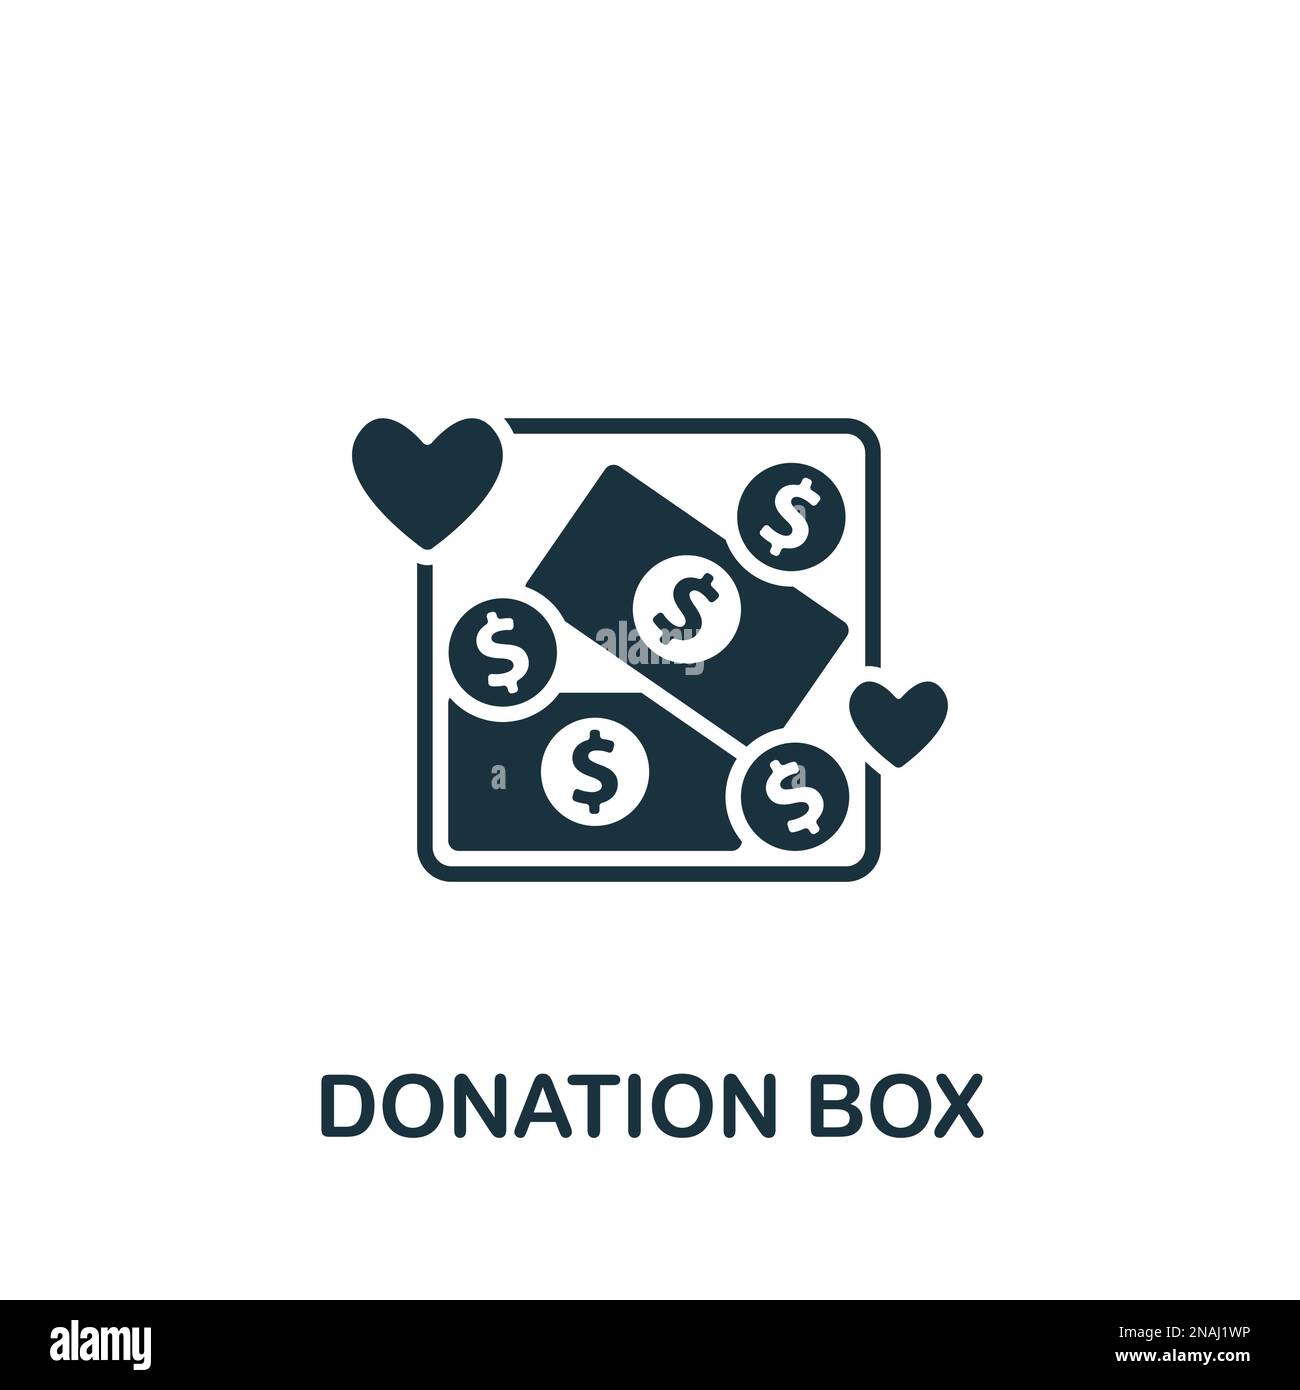 Donation box icon. Monochrome simple sign from donation collection. Donation box icon for logo, templates, web design and infographics. Stock Vector